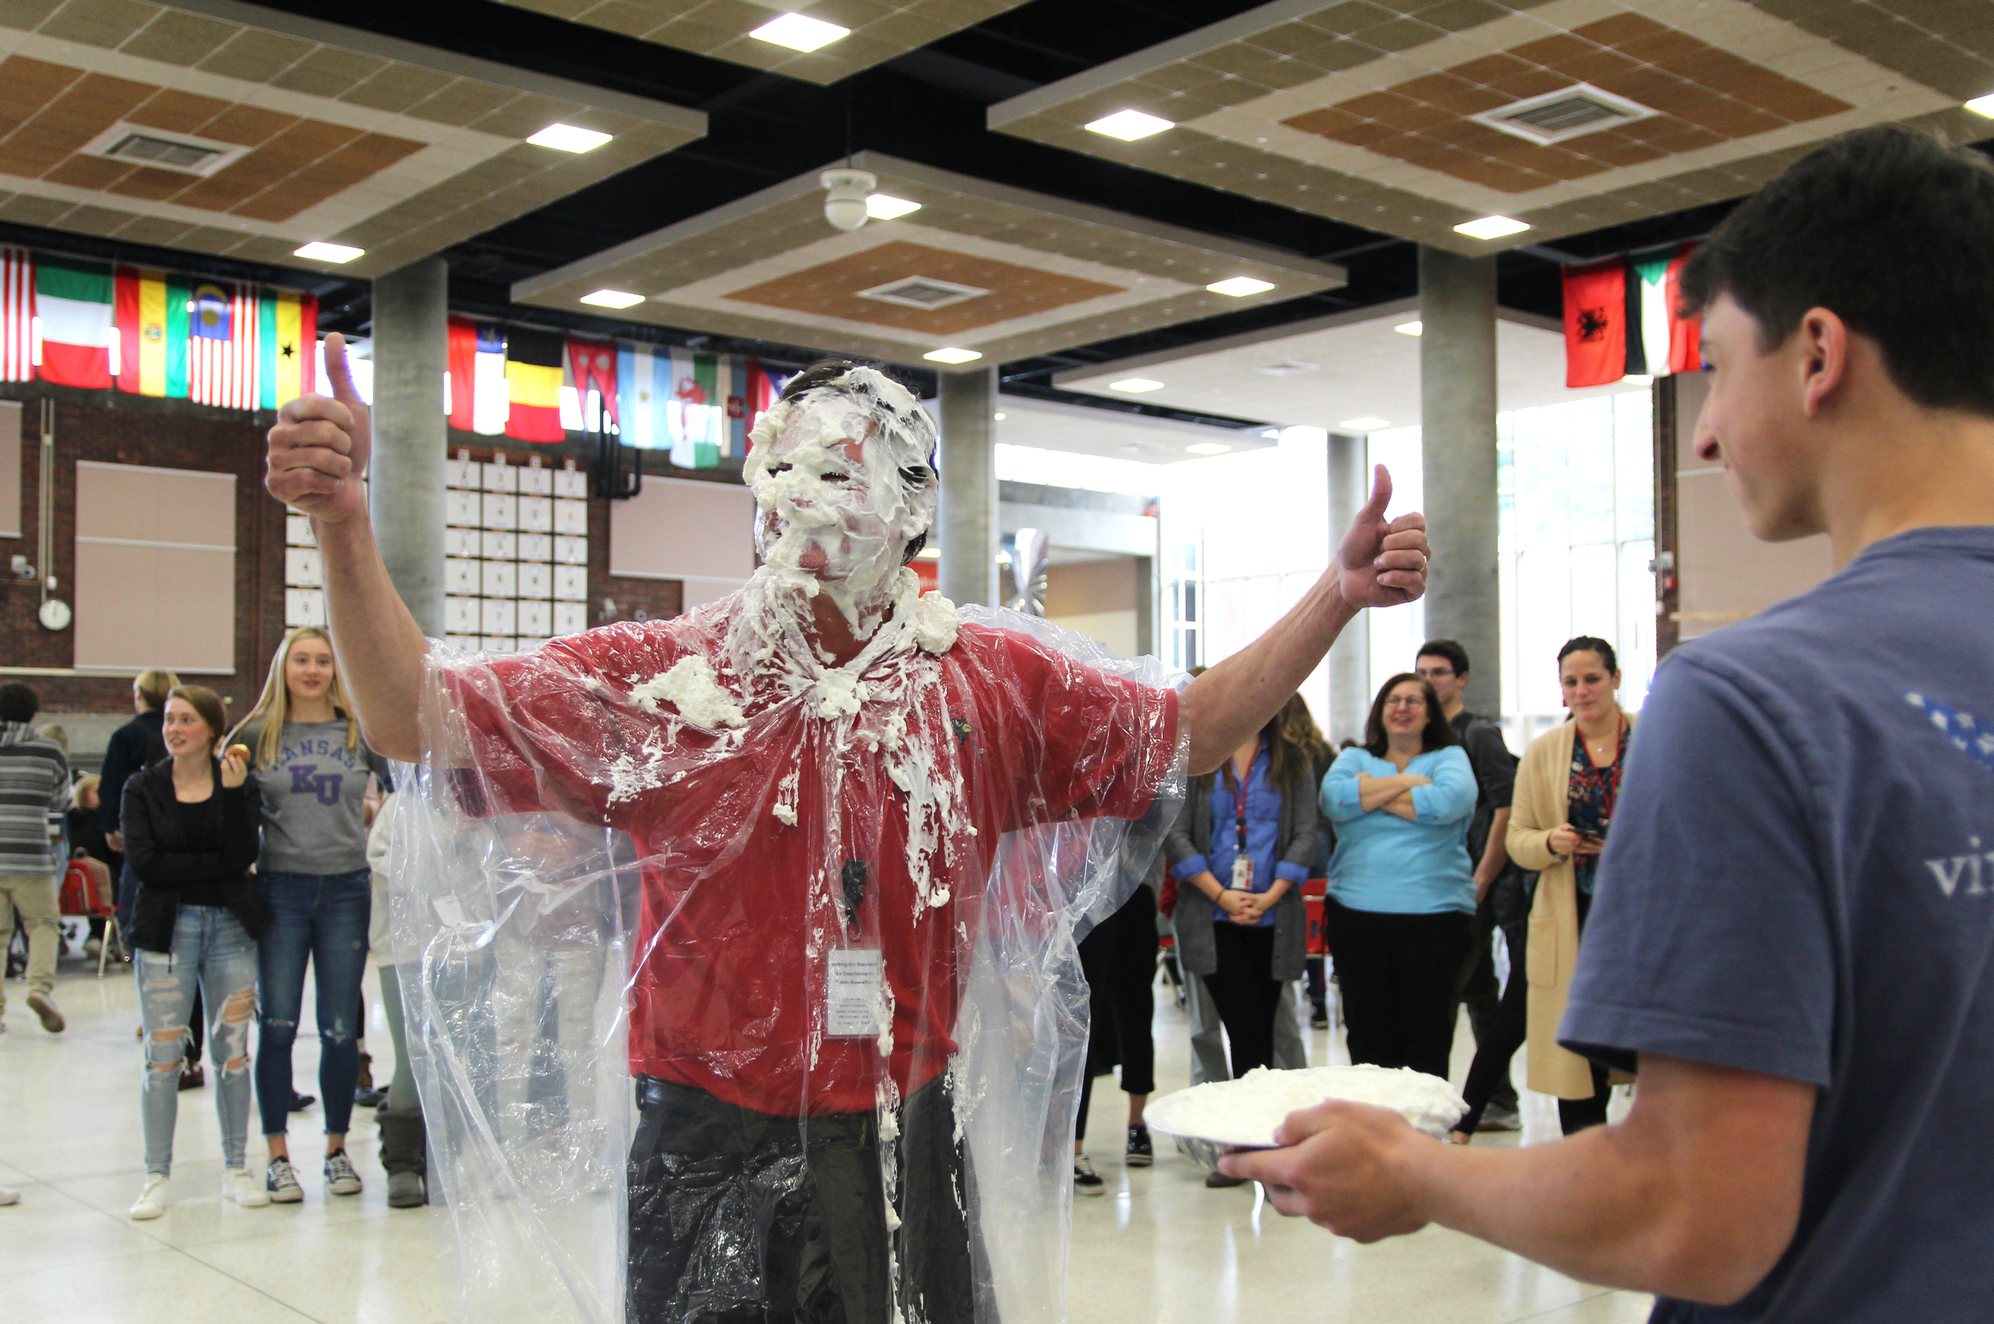 On Wednesday interim headmaster Rick Piotrzkowski got pied by students to honor the winning houses in the annual Thanksgiving penny wars and food drive at Greenwich High School. Nov 21, 2018 Photo: Leslie Yager